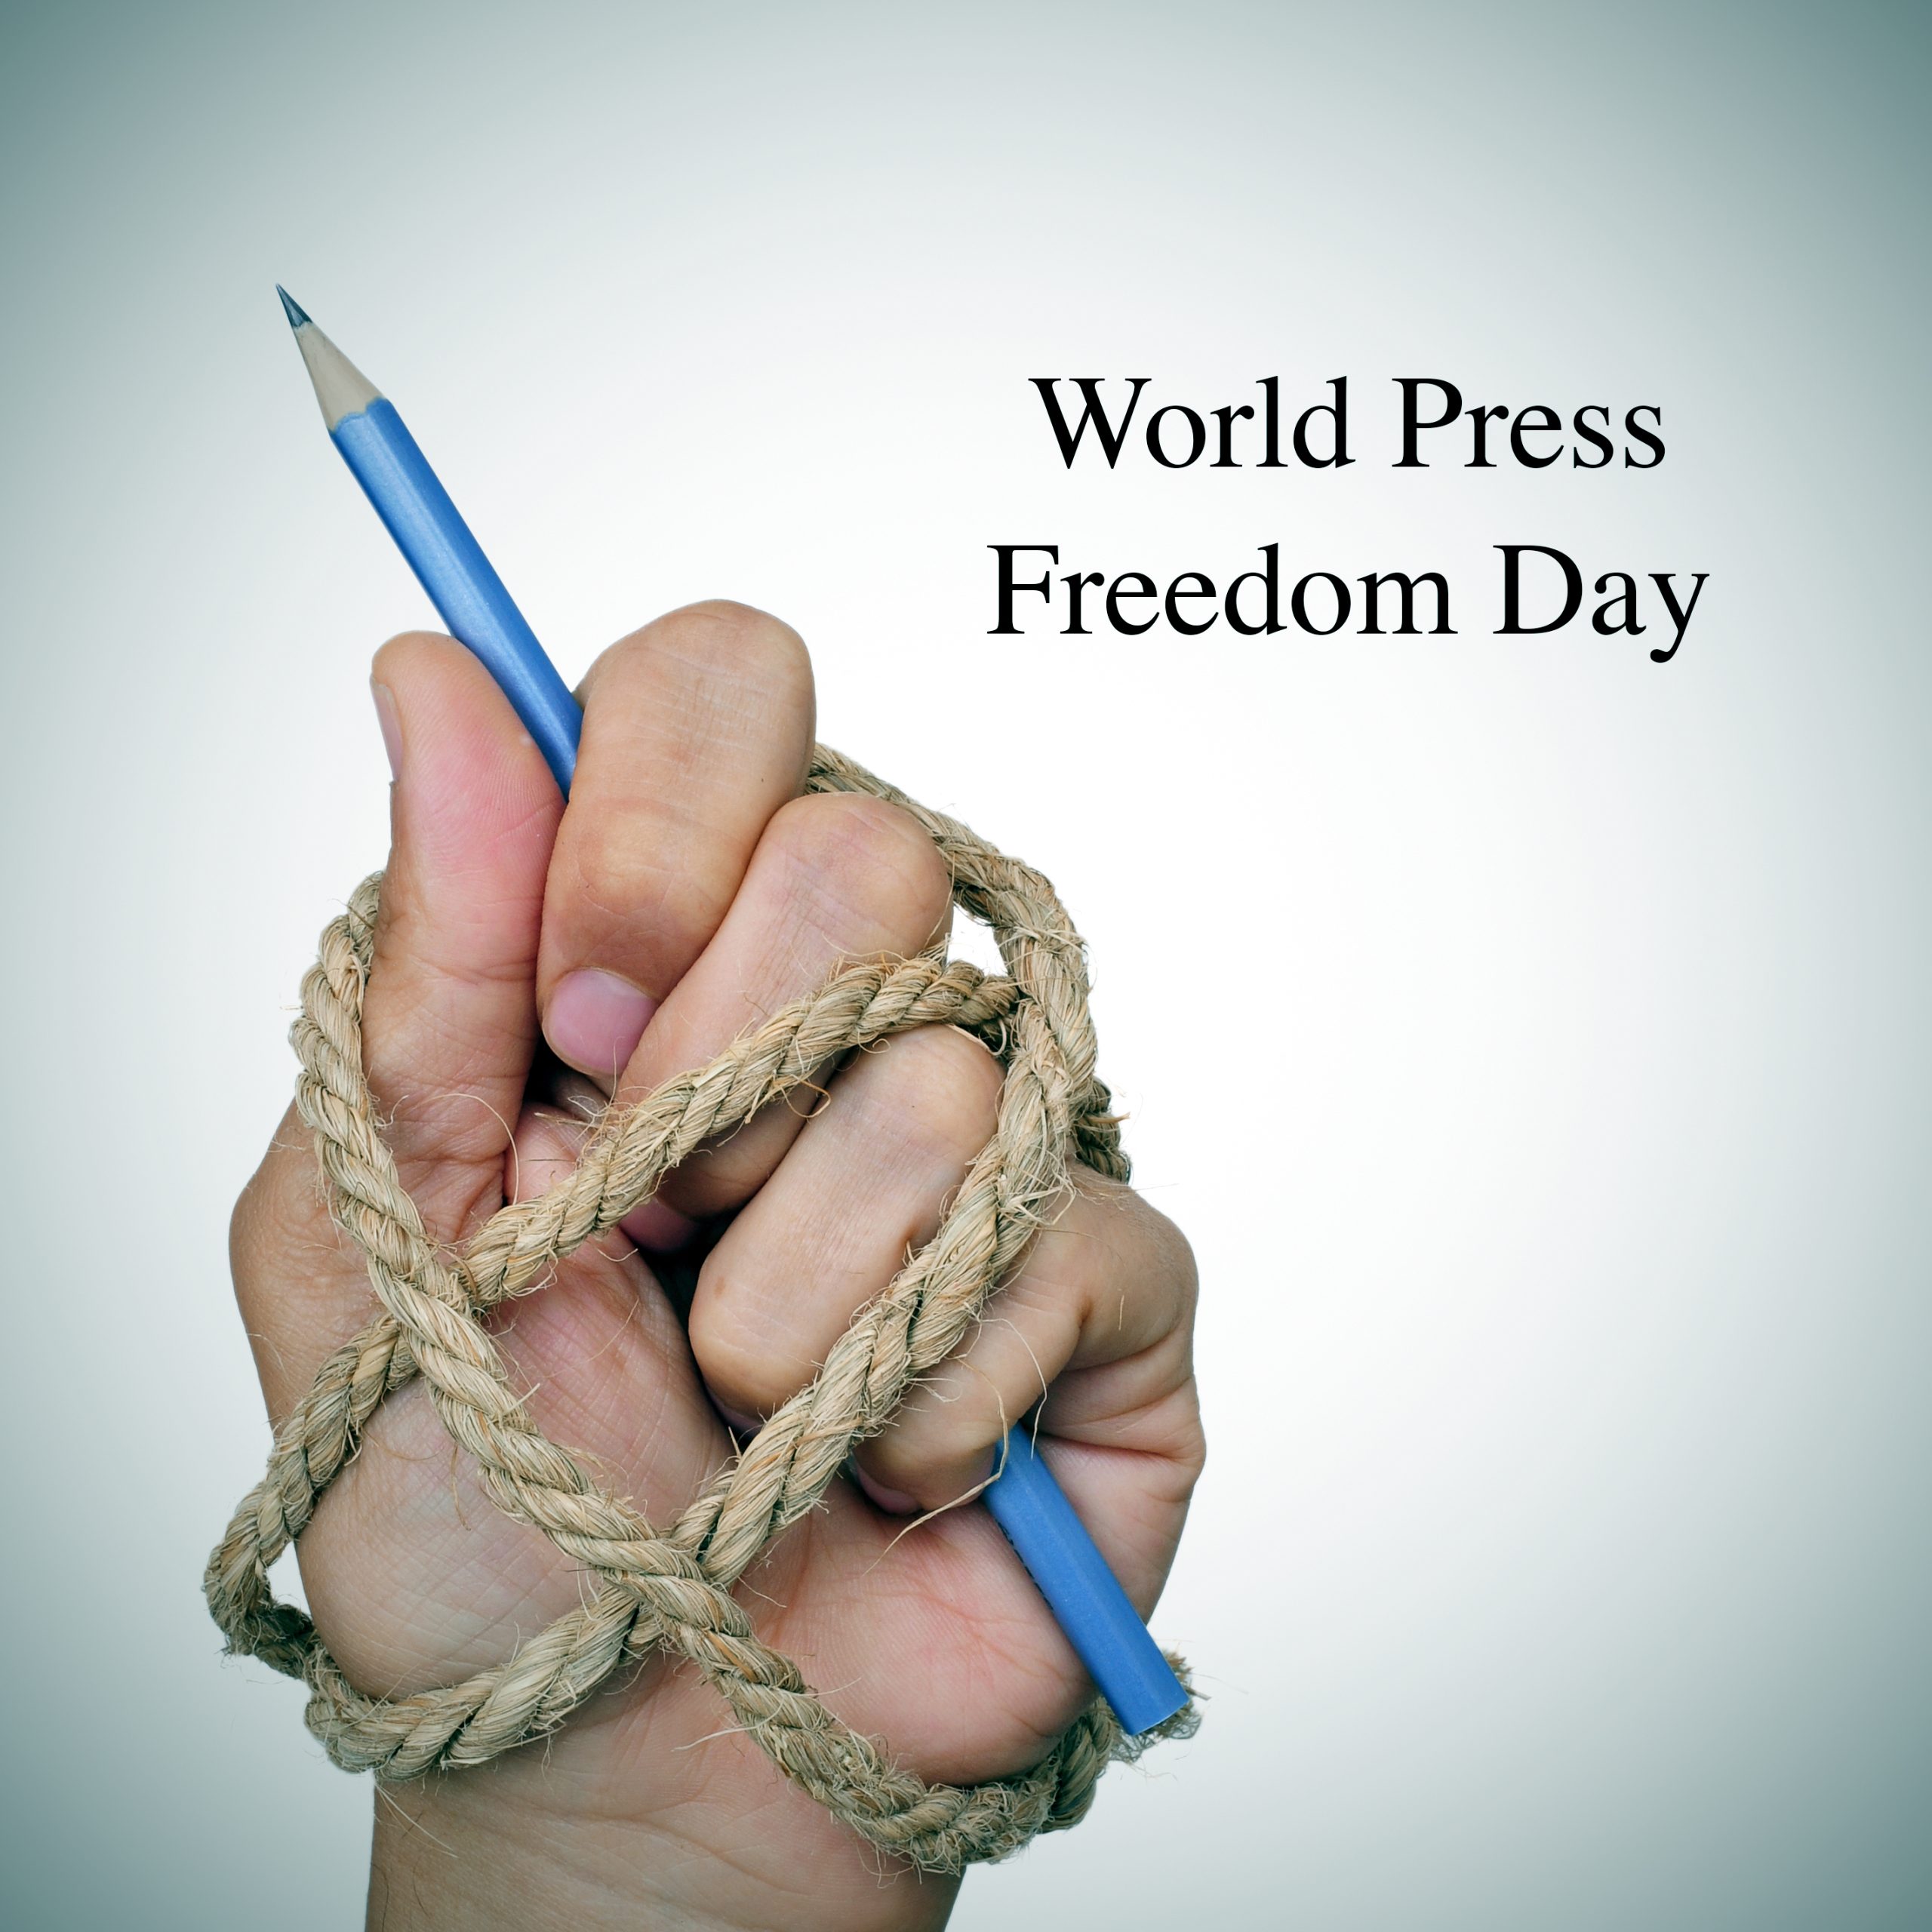 World Press Freedom Day Commission stands up for media freedom and